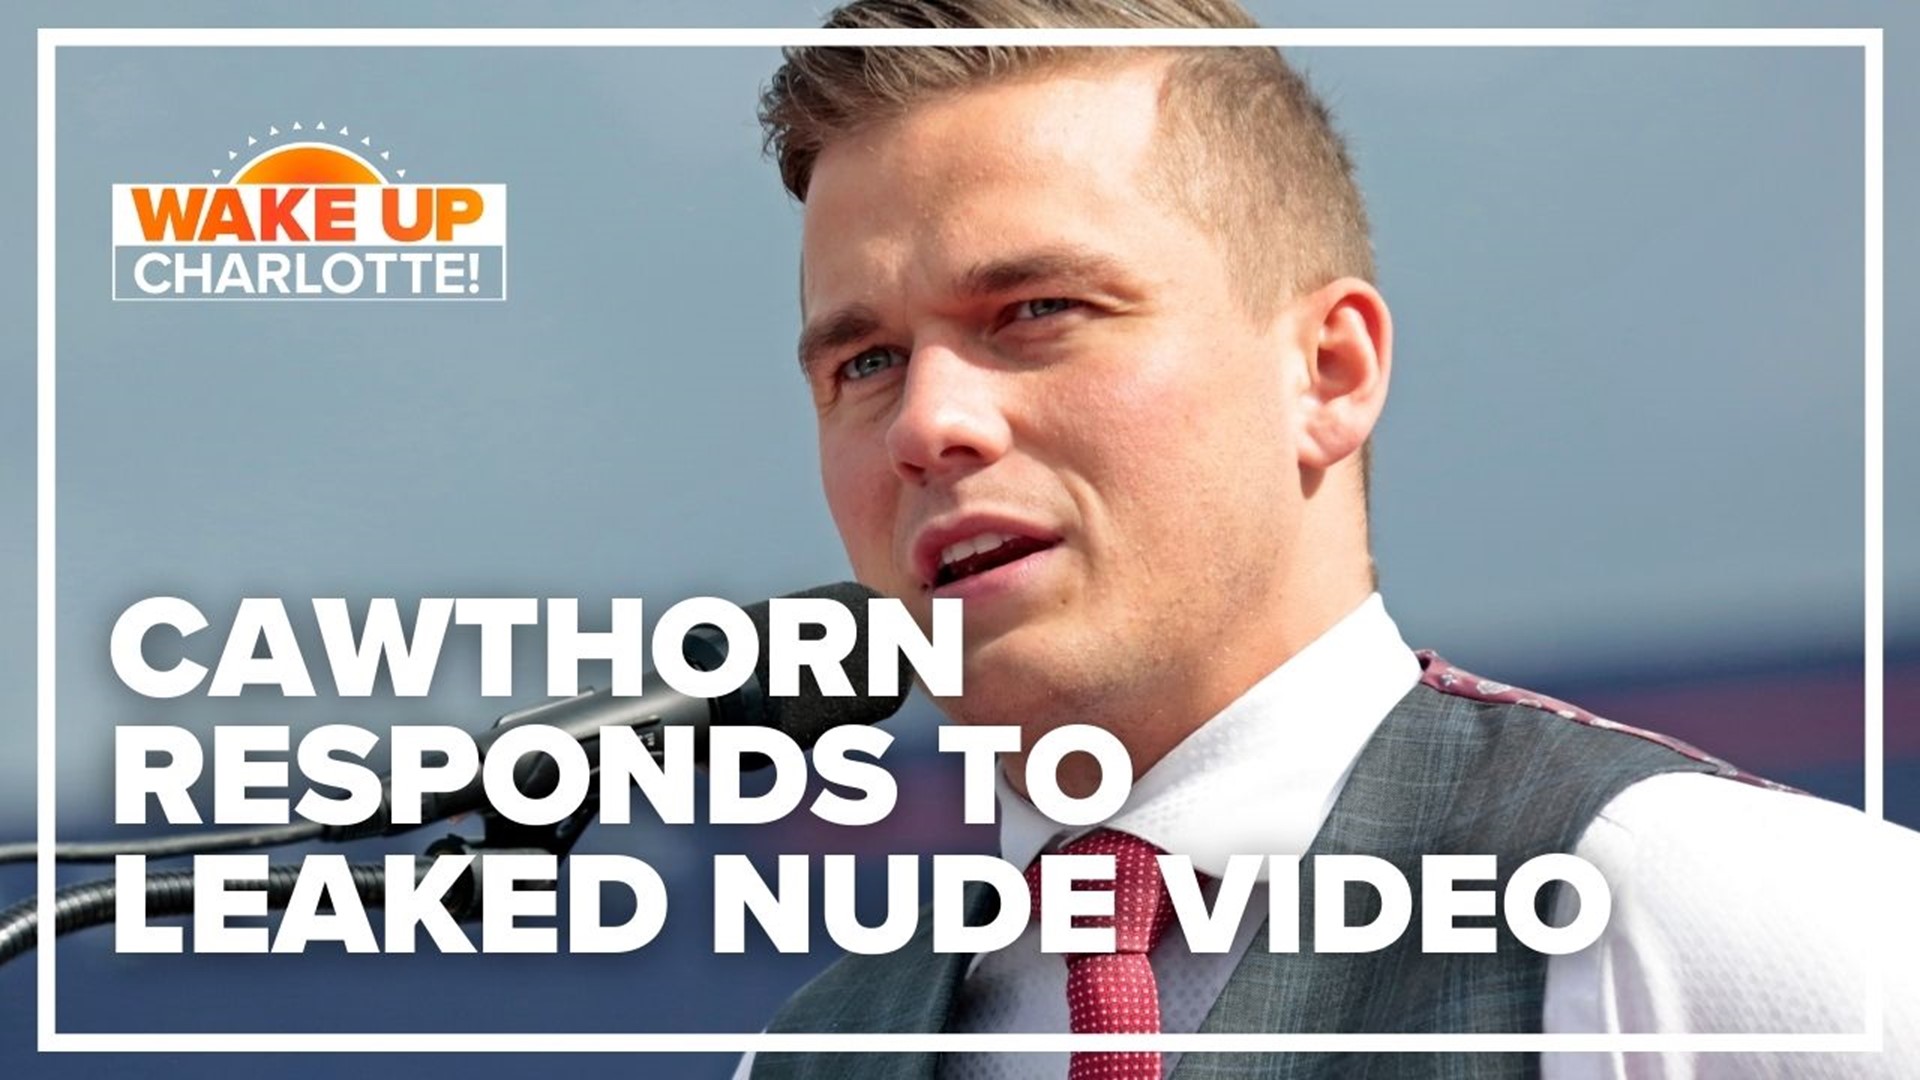 North Carolina Rep. Madison Cawthorn is facing backlash after a leaked video appears to show him naked trying to simulate a sex act.